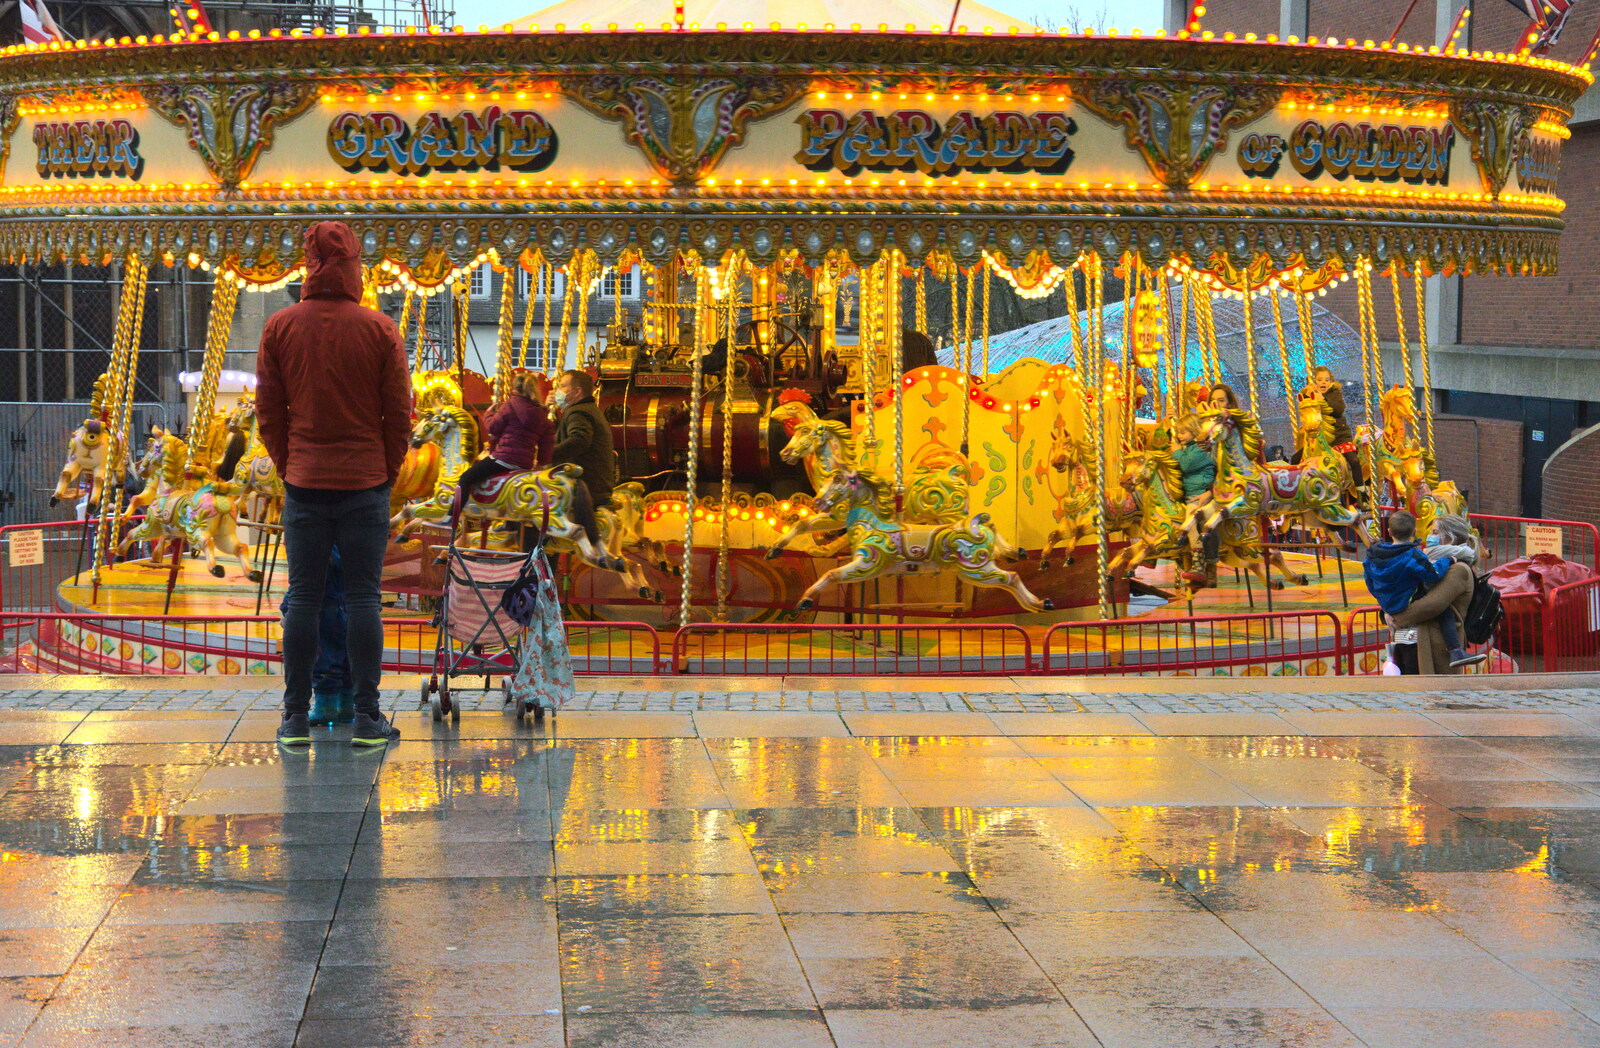 There's a carousel in front of the Forum from A Bit of Christmas Shopping, Norwich, Norfolk - 23rd December 2020